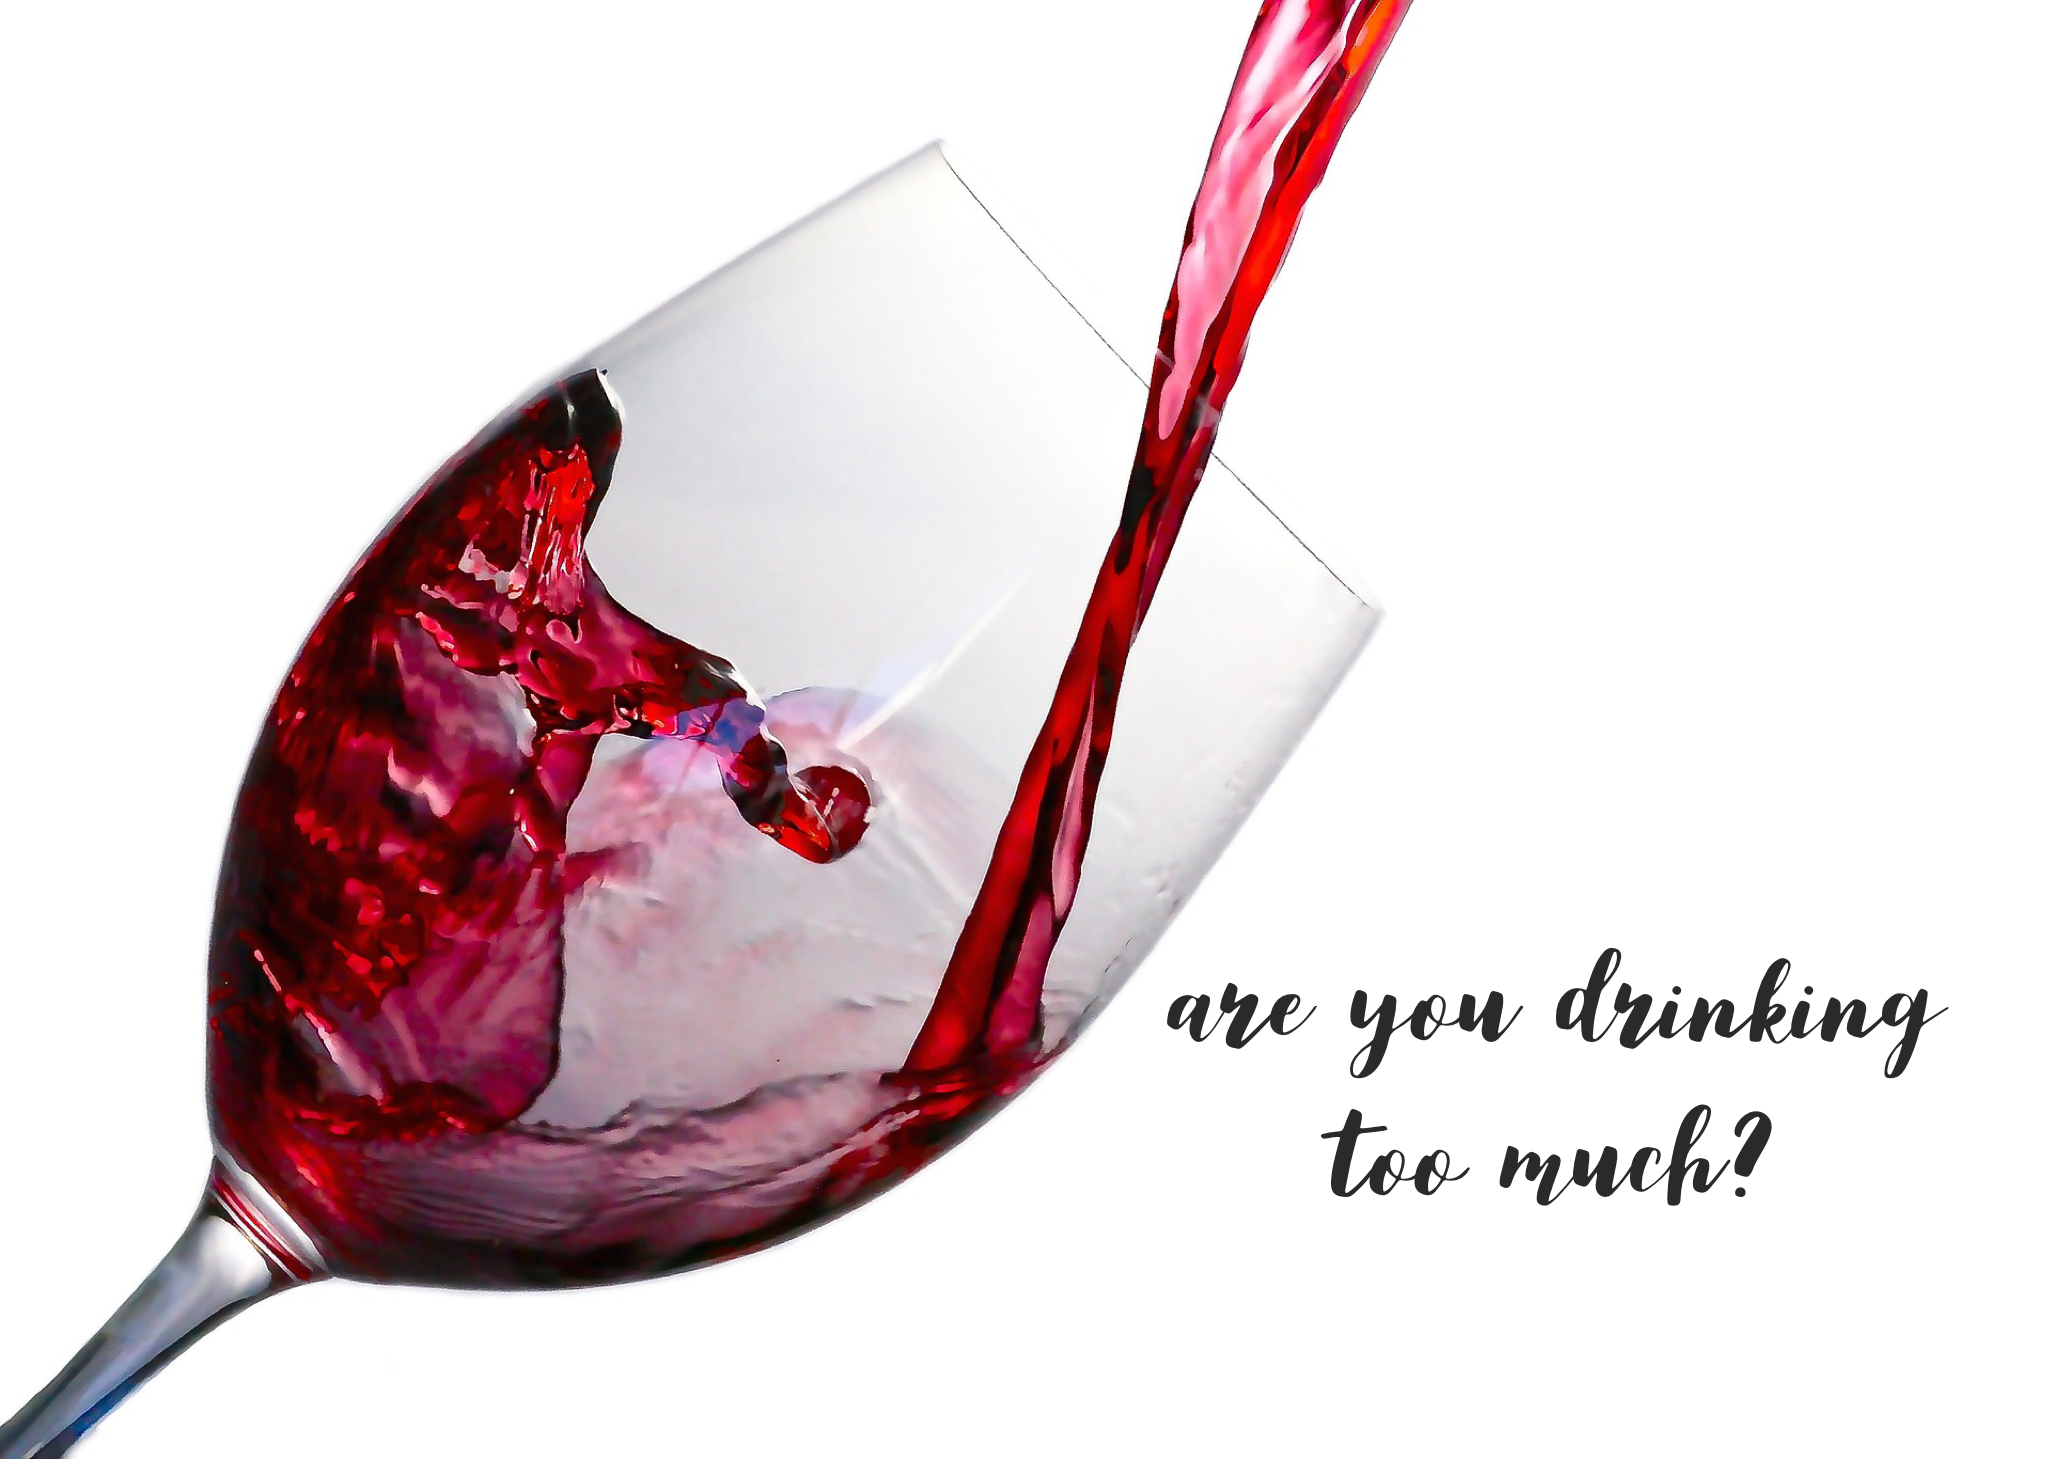 Are you drinking too much glass of wine